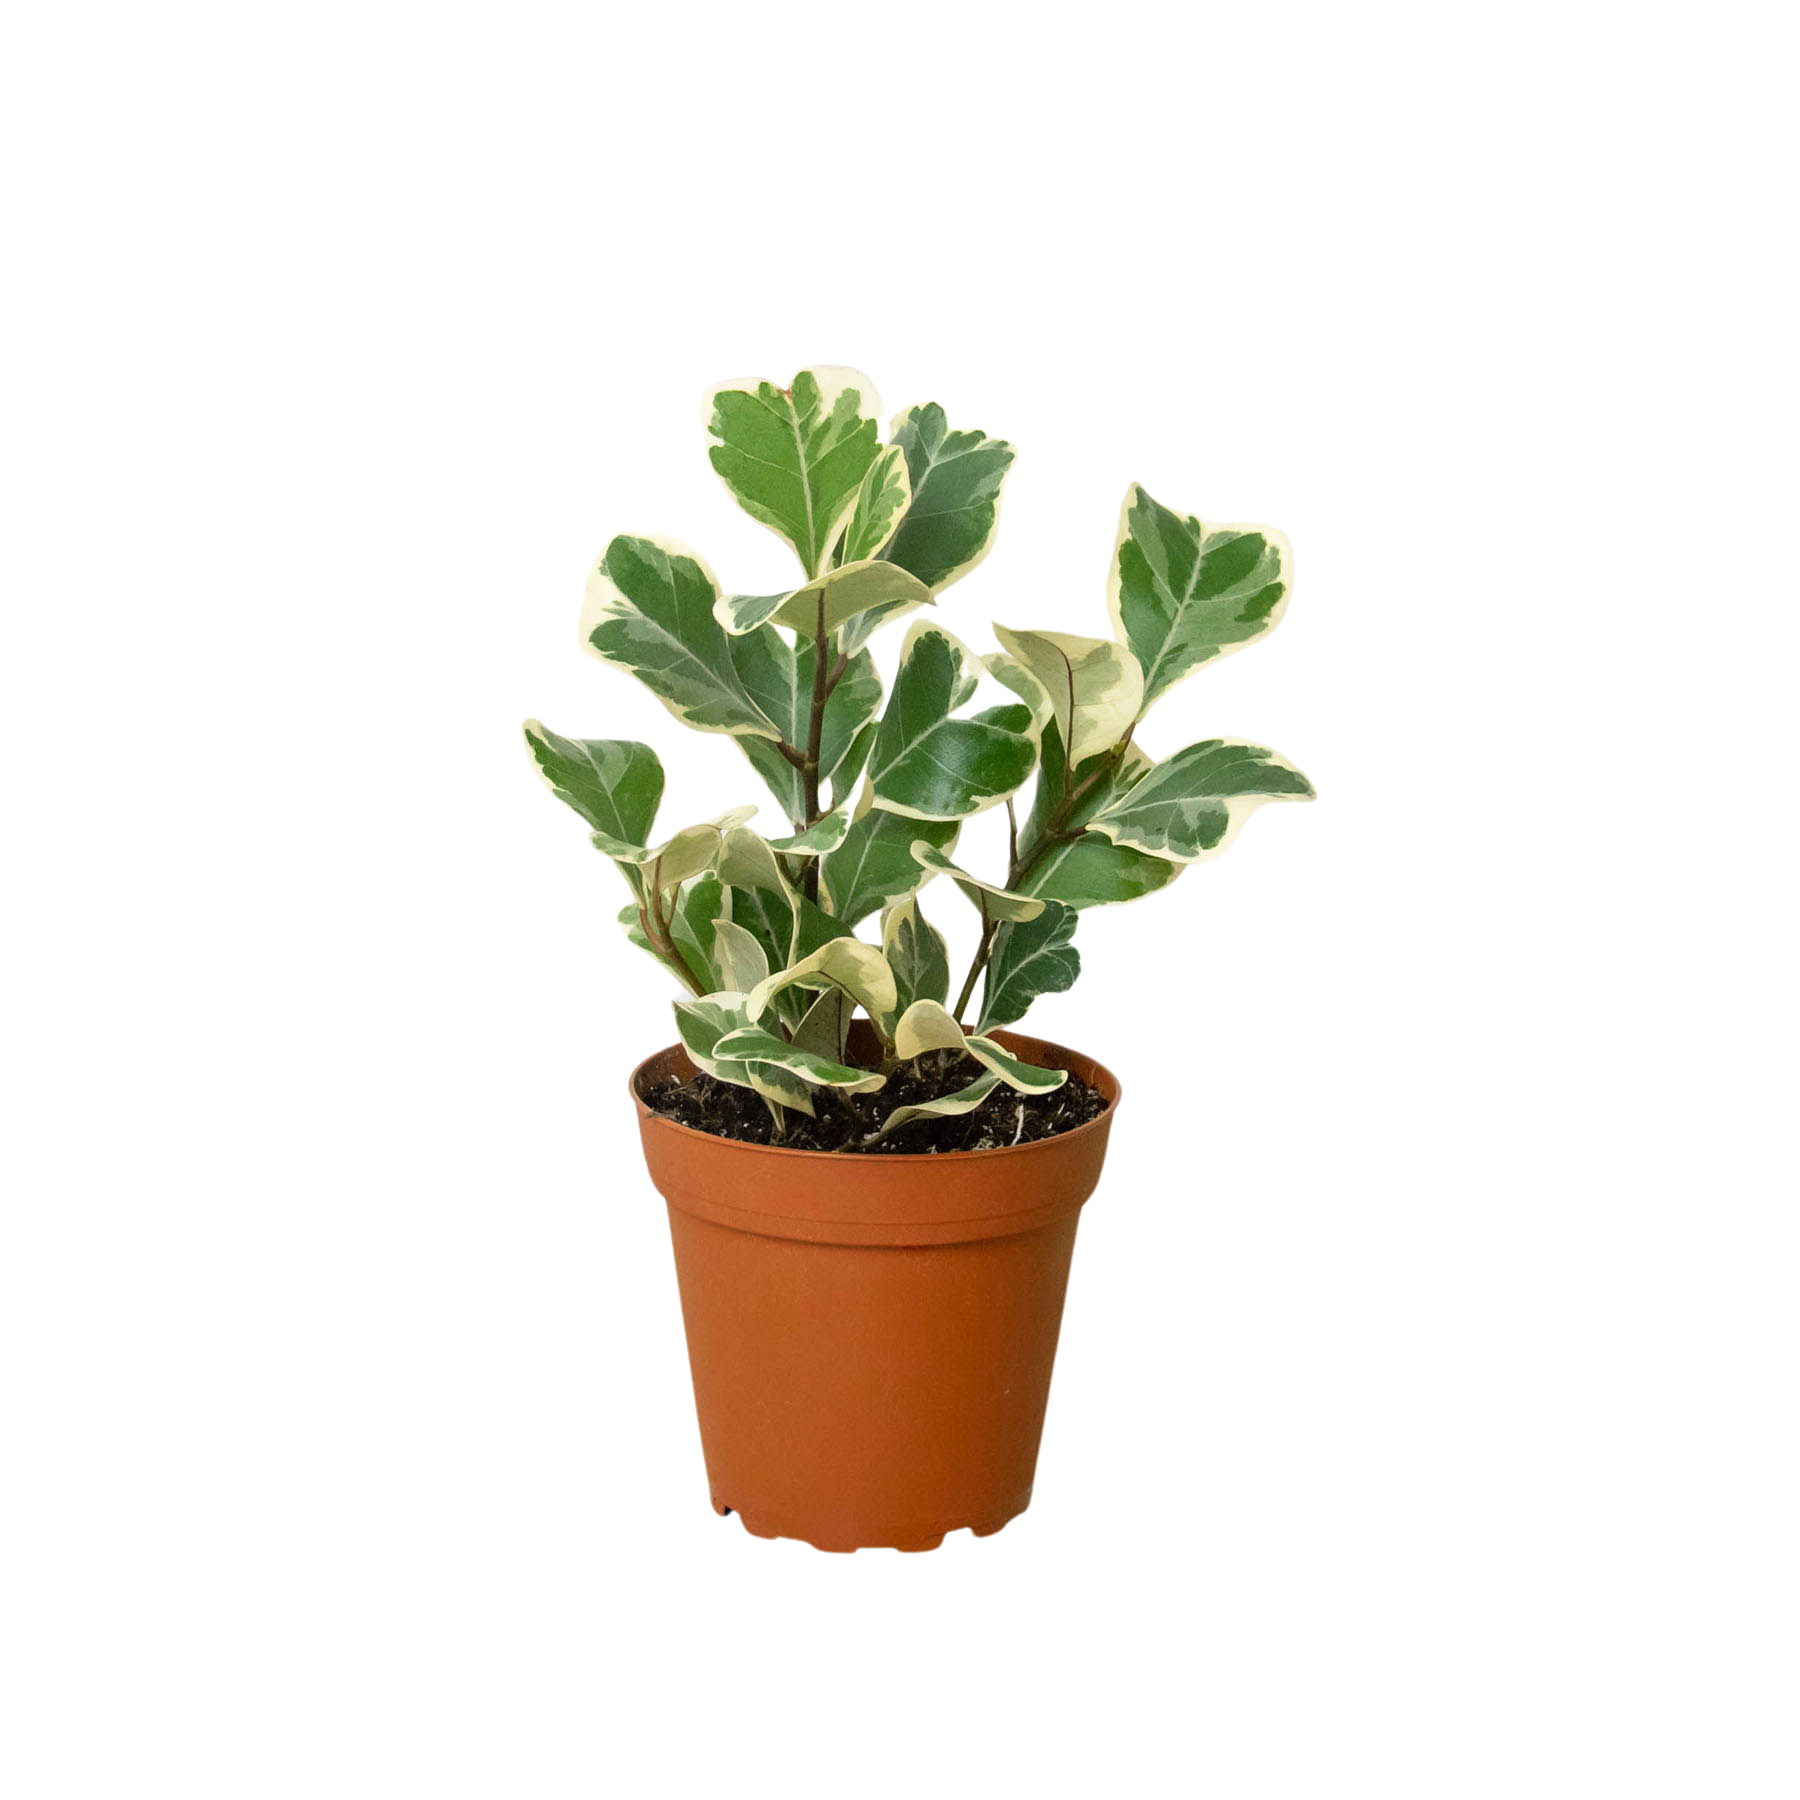 A small plant in a pot on a white background, perfect for your favorite plant nursery.